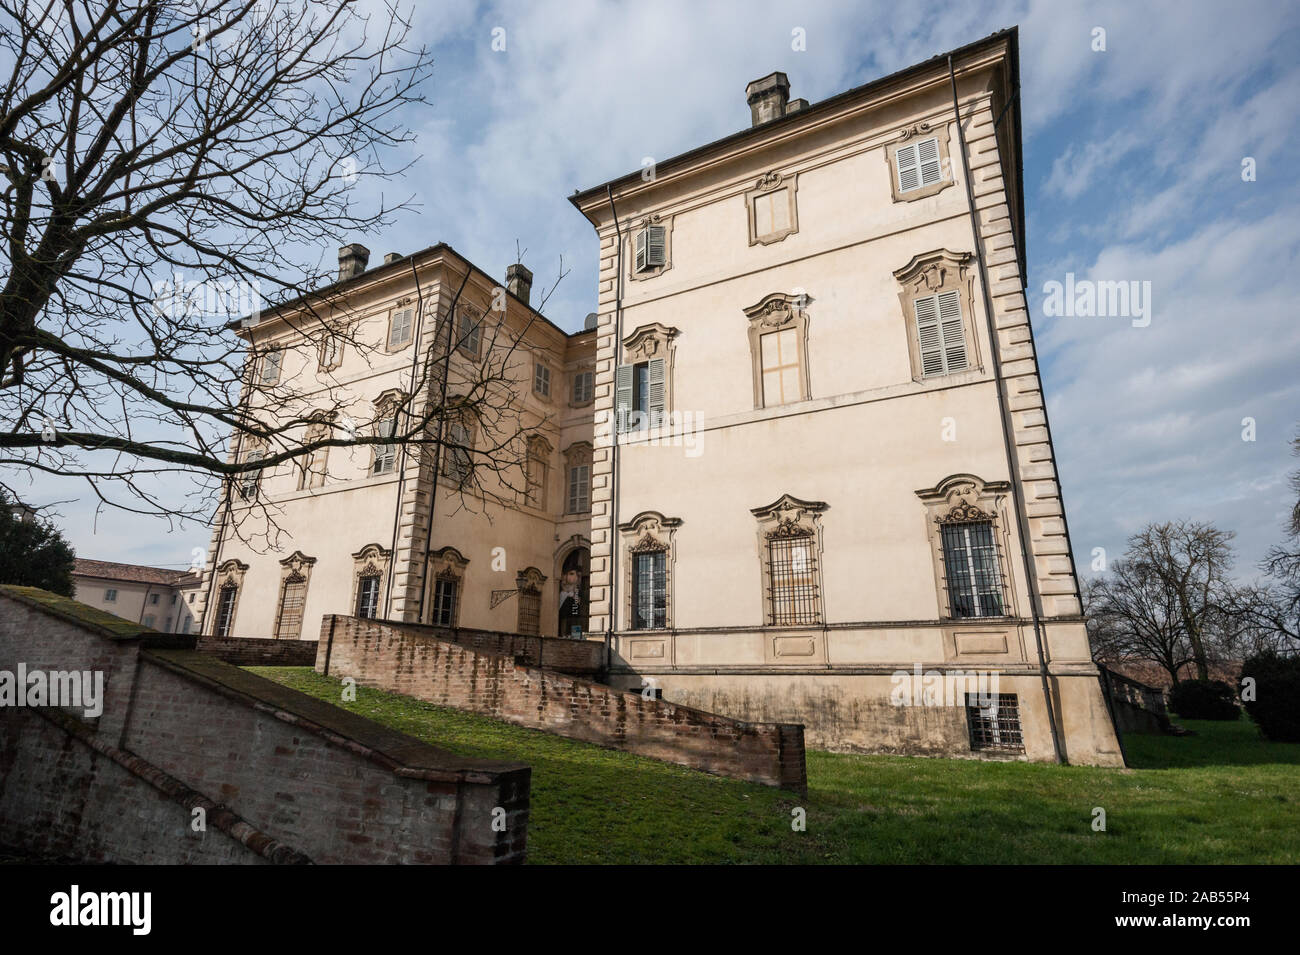 The Museo Giuseppe Verdi musical museum in Busseto, Parma, Emilia Romagna, Italy, dedicated to the famous Italian opera composer born nearby, exterior Stock Photo